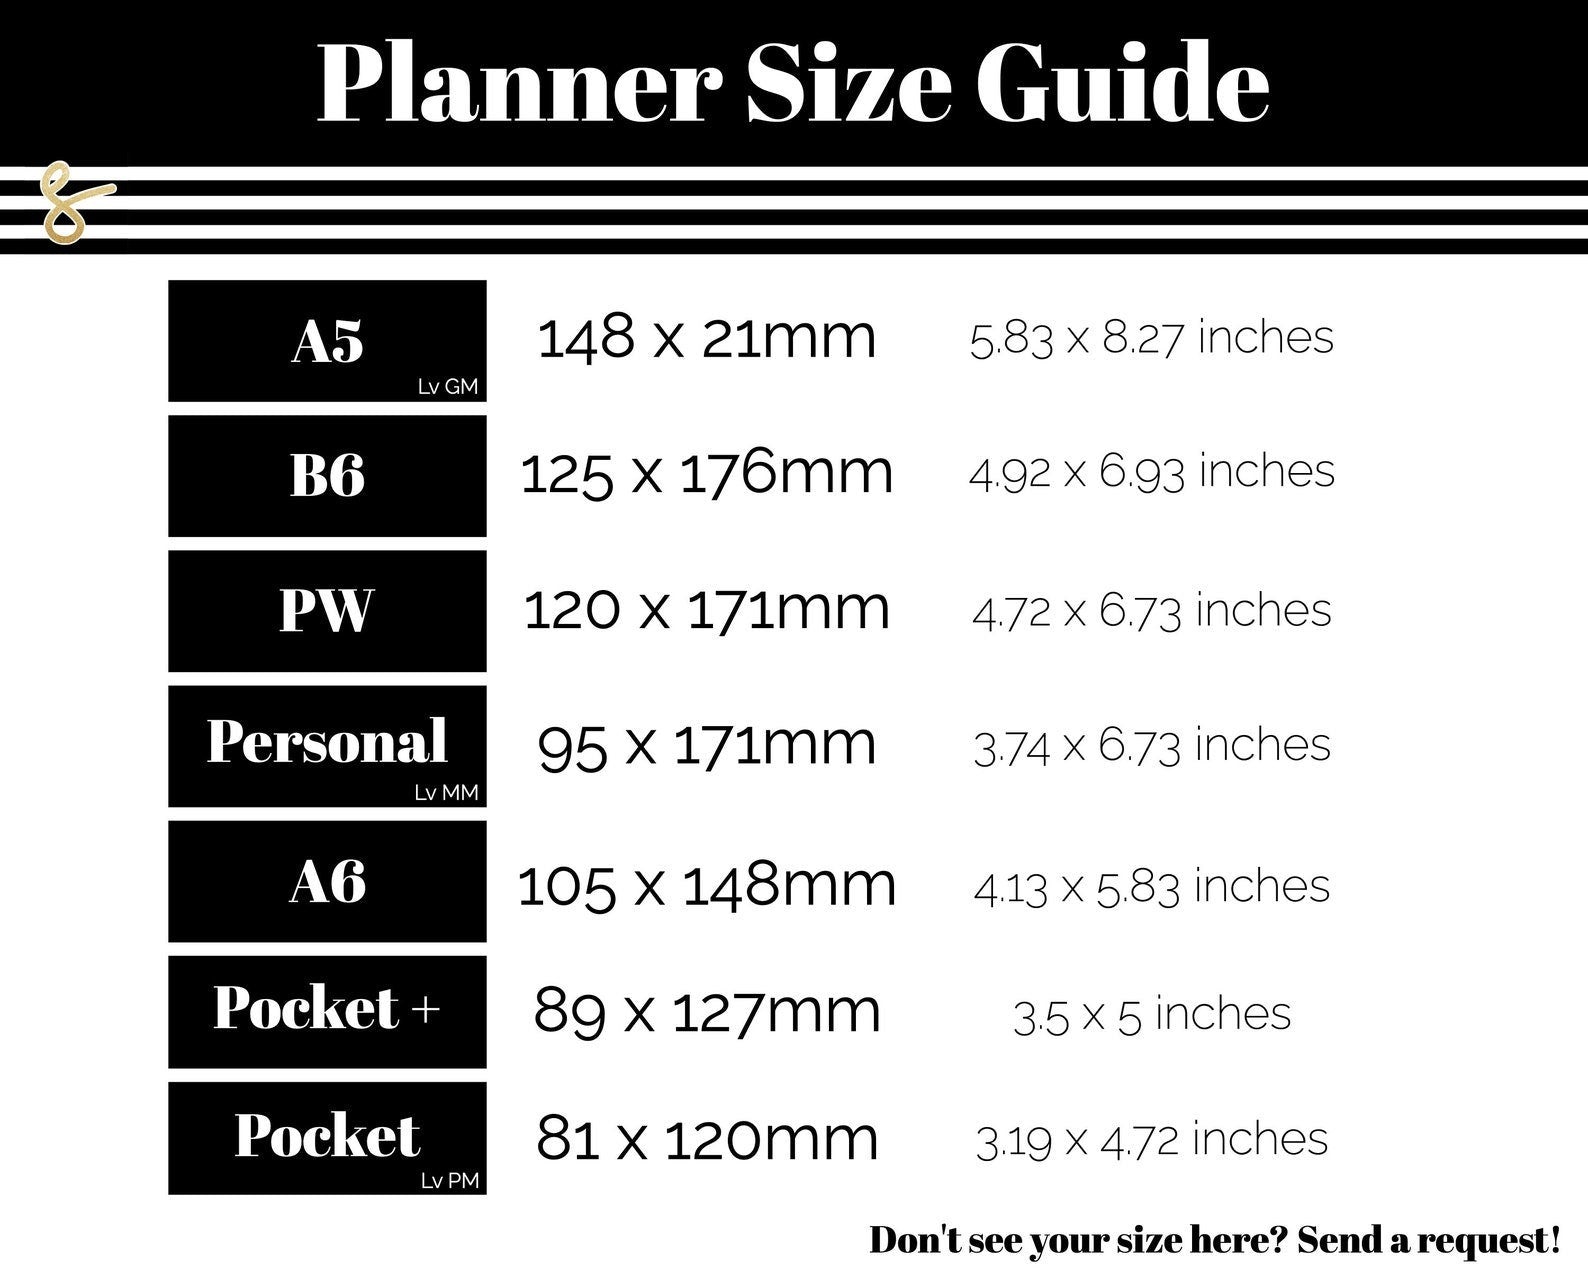 Monthly Photographic Dividers - Choose Your Size